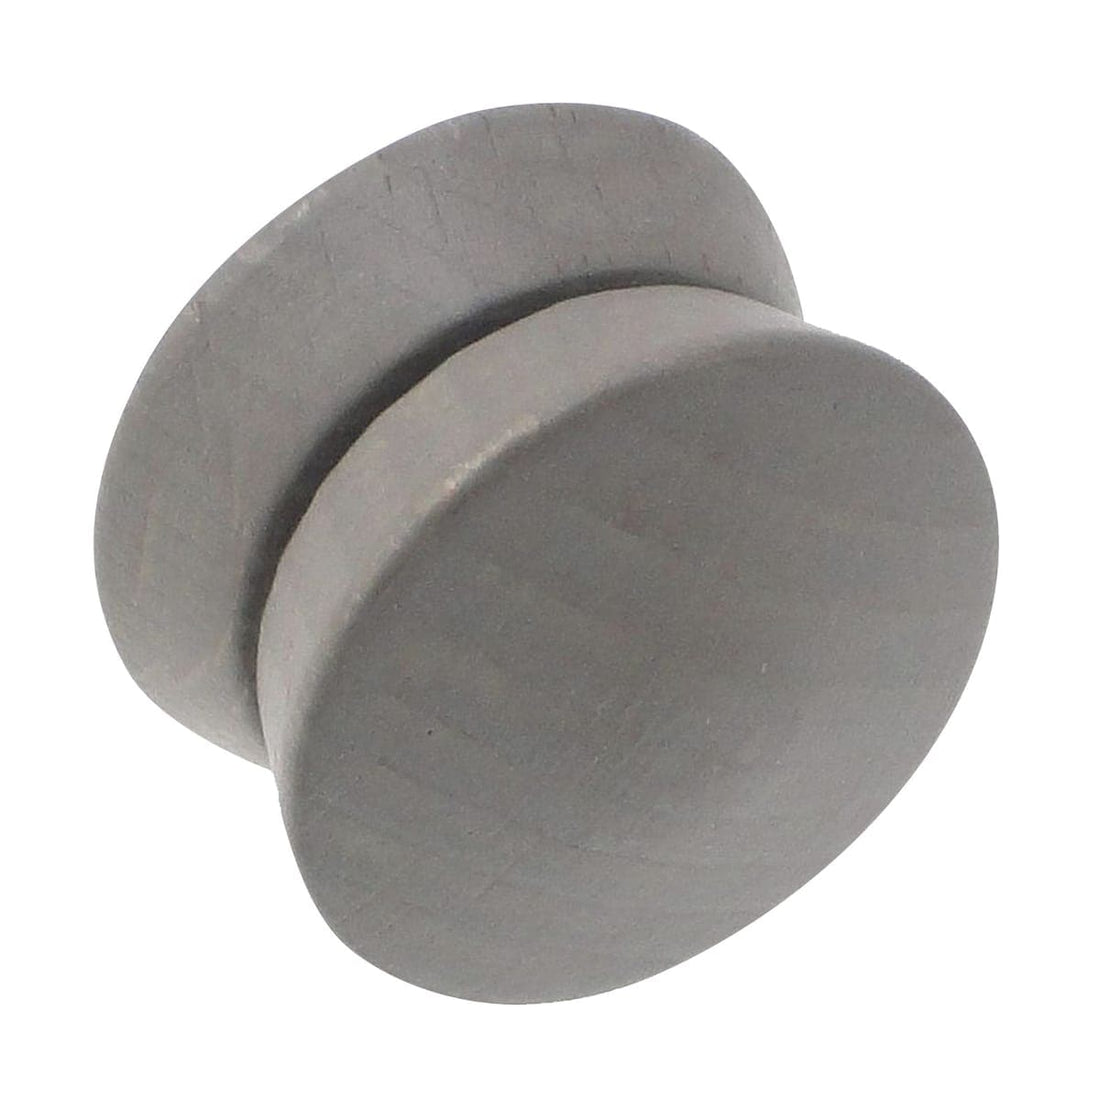 MAGNETIC BUTTONS WOOD 32 MM GREY 2 PIECES - best price from Maltashopper.com BR480003823